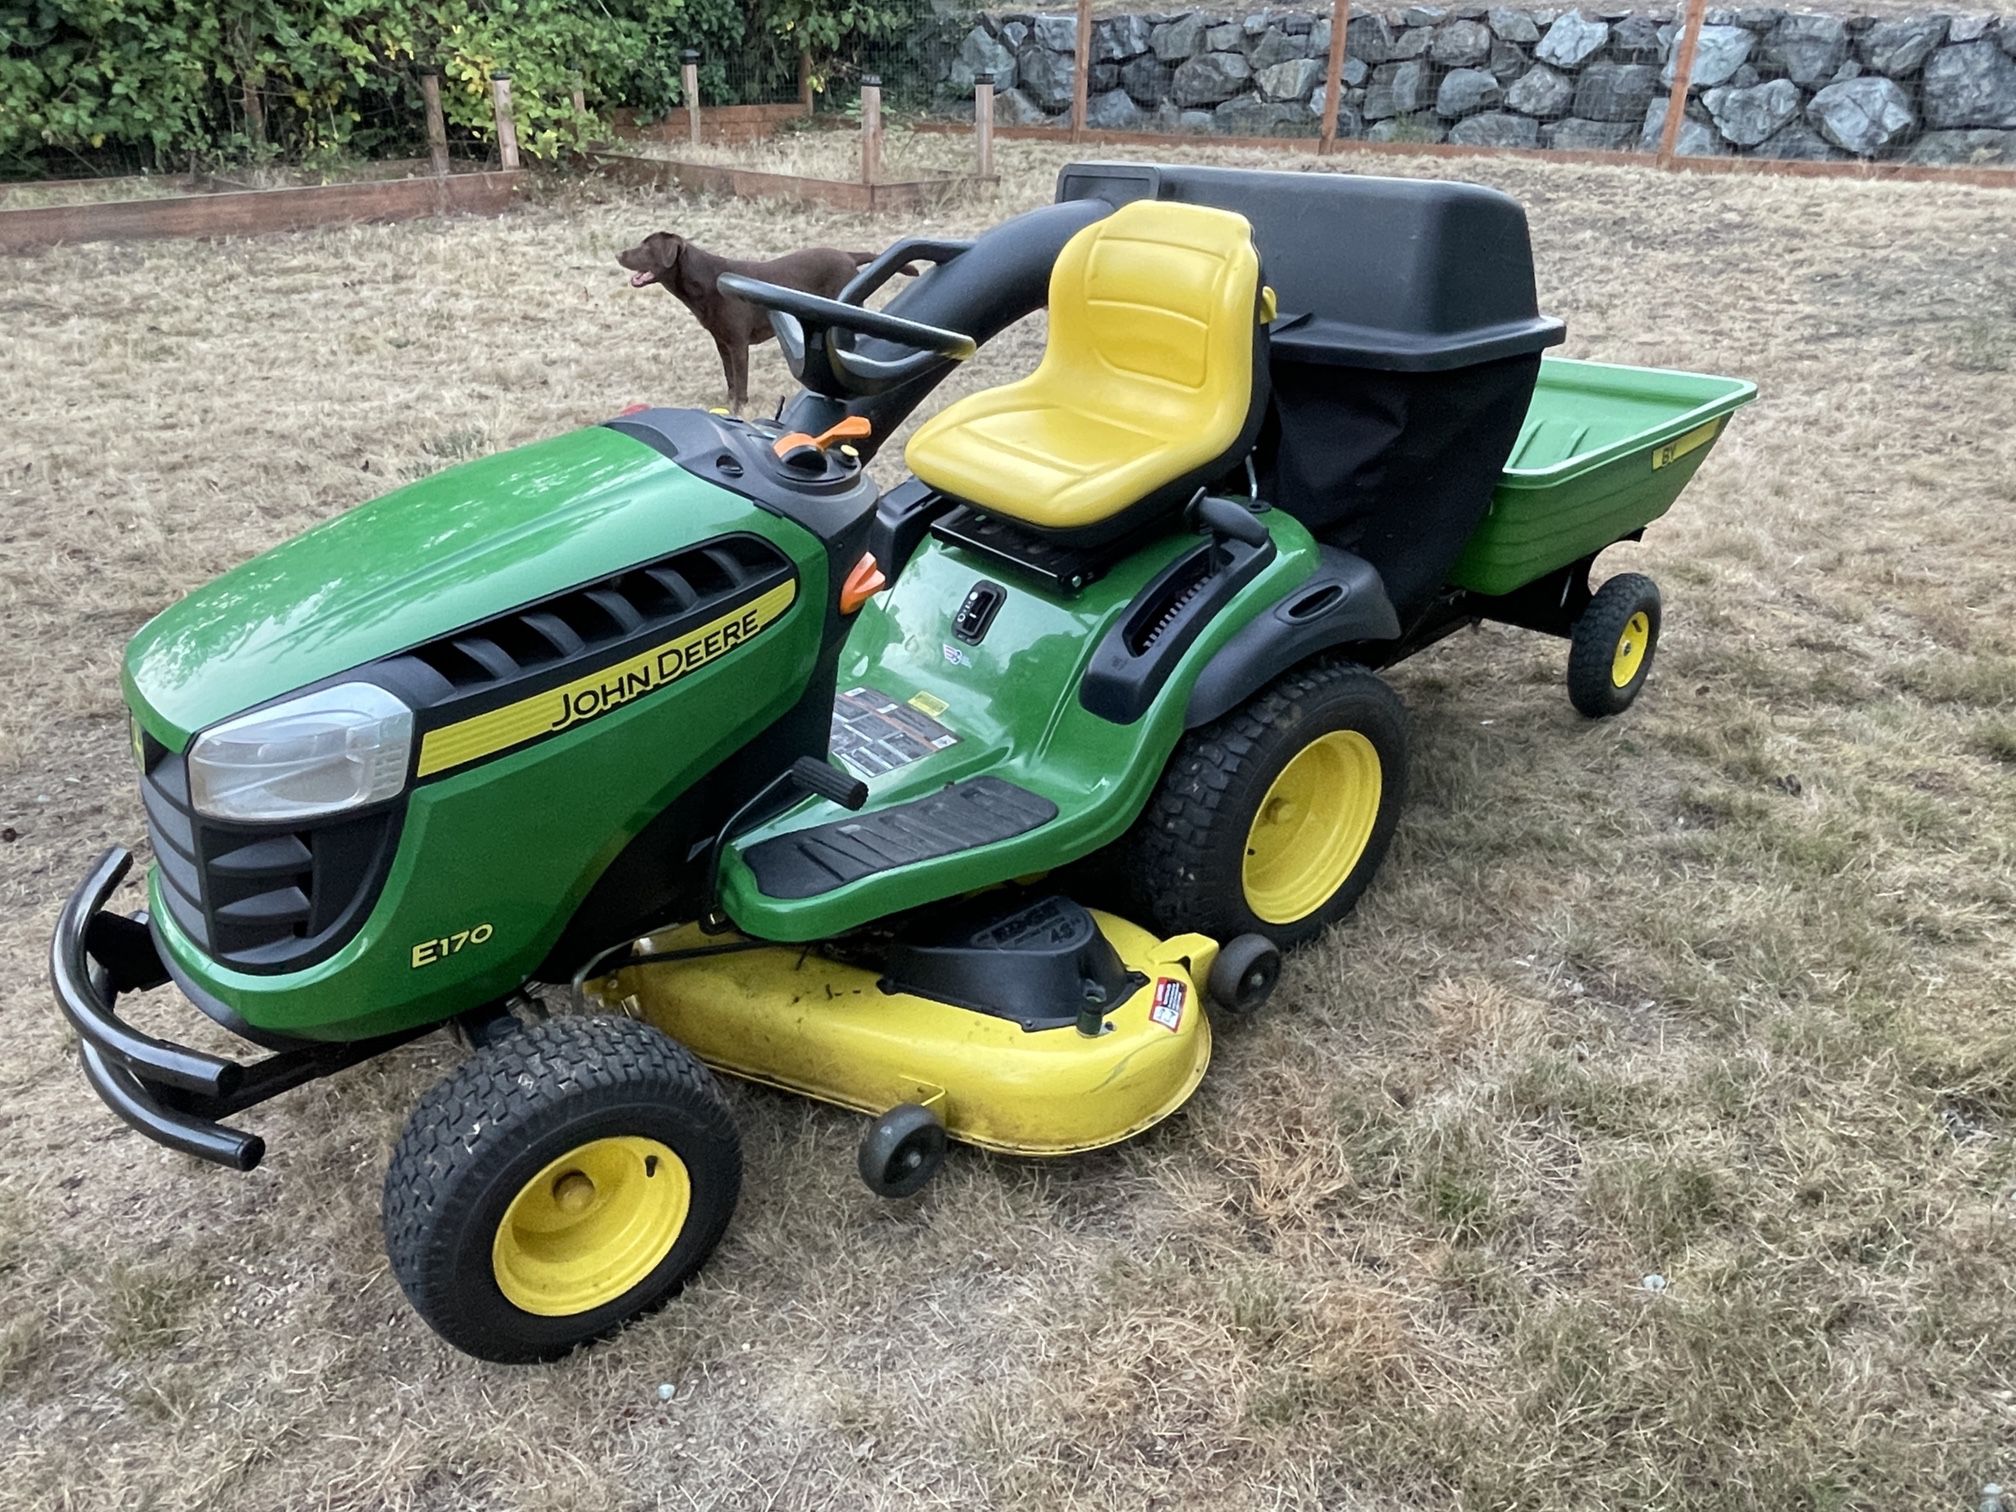 JOHN DEERE E170 Riding Lawn Mower With Bagging System And Trailer Low Hours